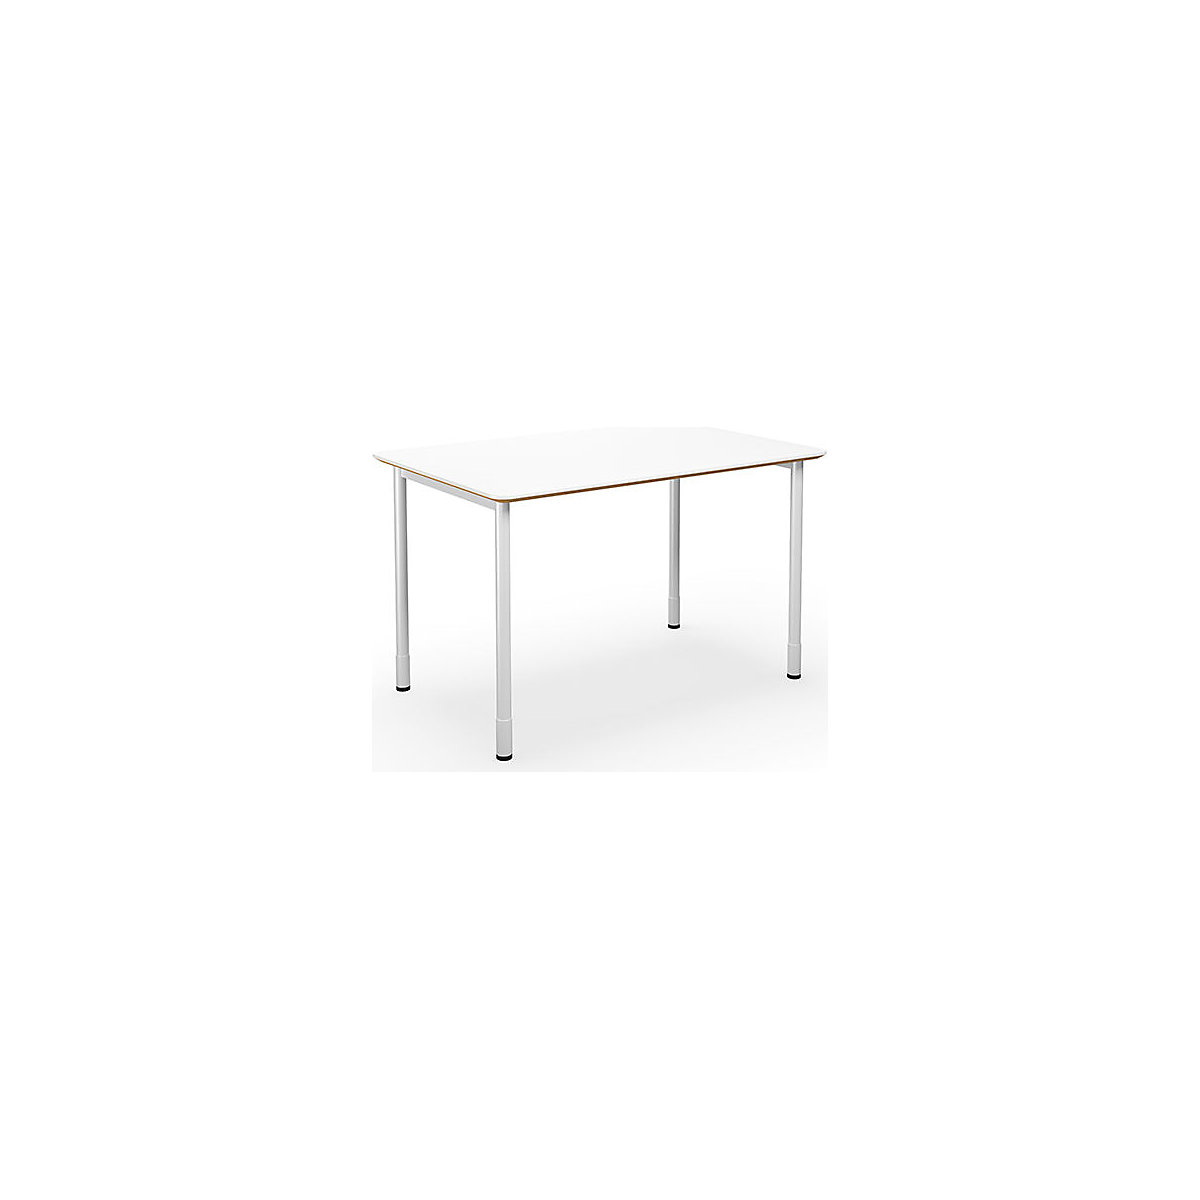 DUO-C Trend multi-purpose desk, straight tabletop, rounded corners, WxD 1200 x 800 mm, white, white-4